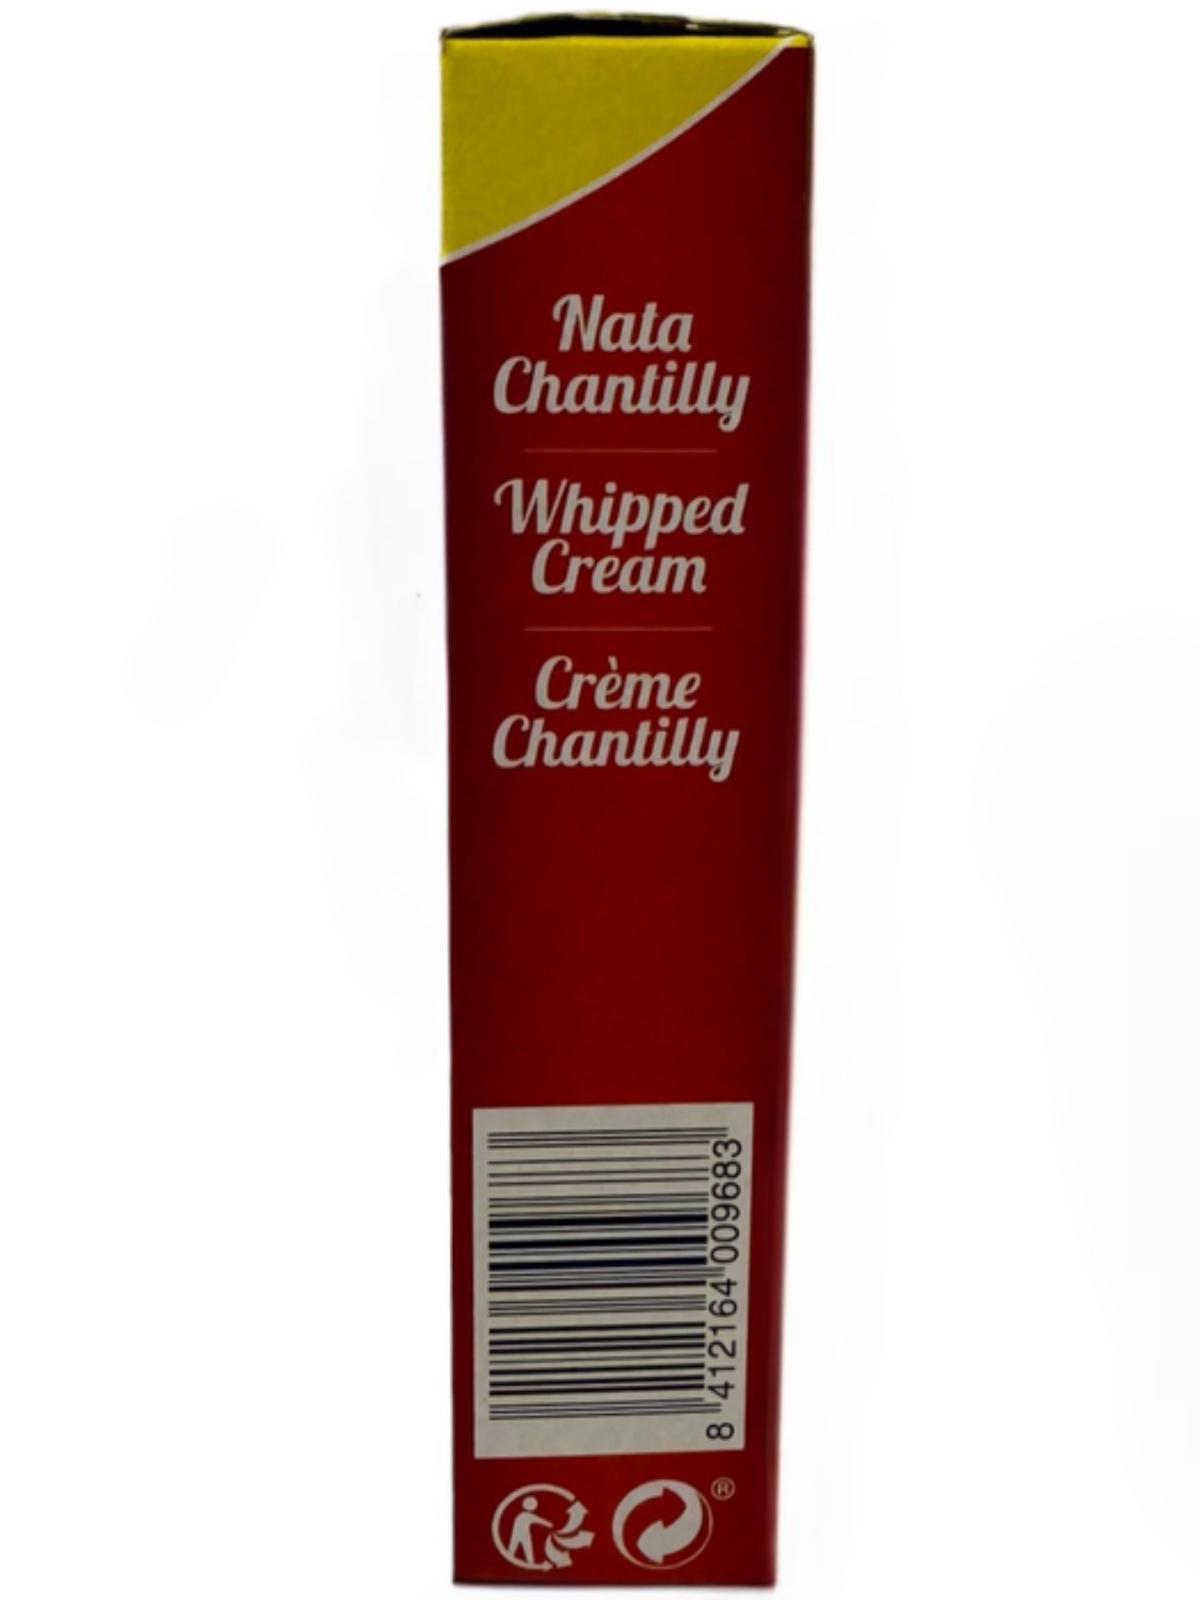 Calnort Nata Chantilly Spanish Whipped Cream 72g - 4 Pack Total 288g